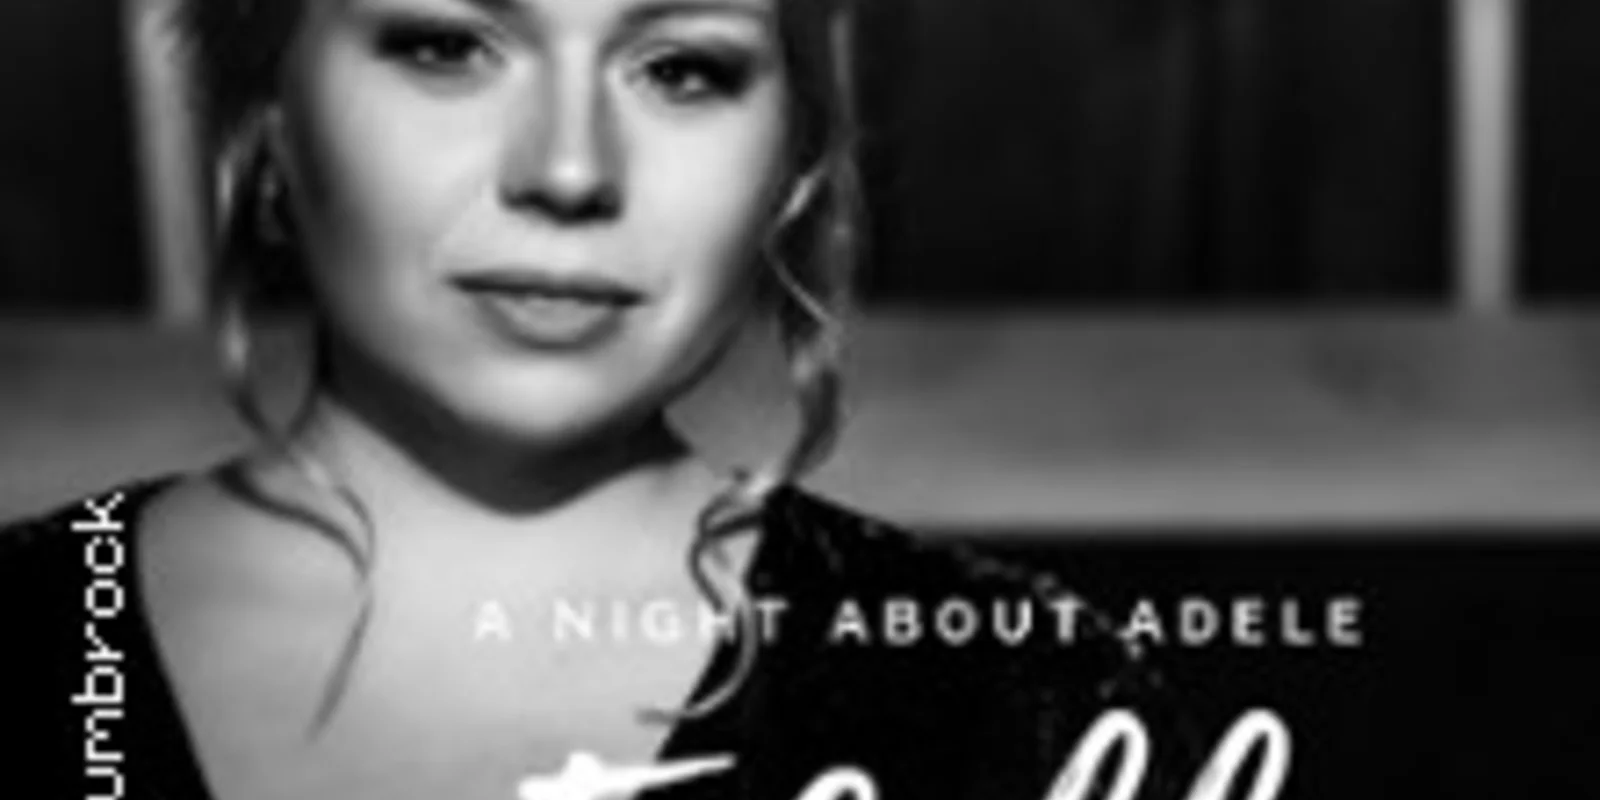 Edelle - a night about Adele